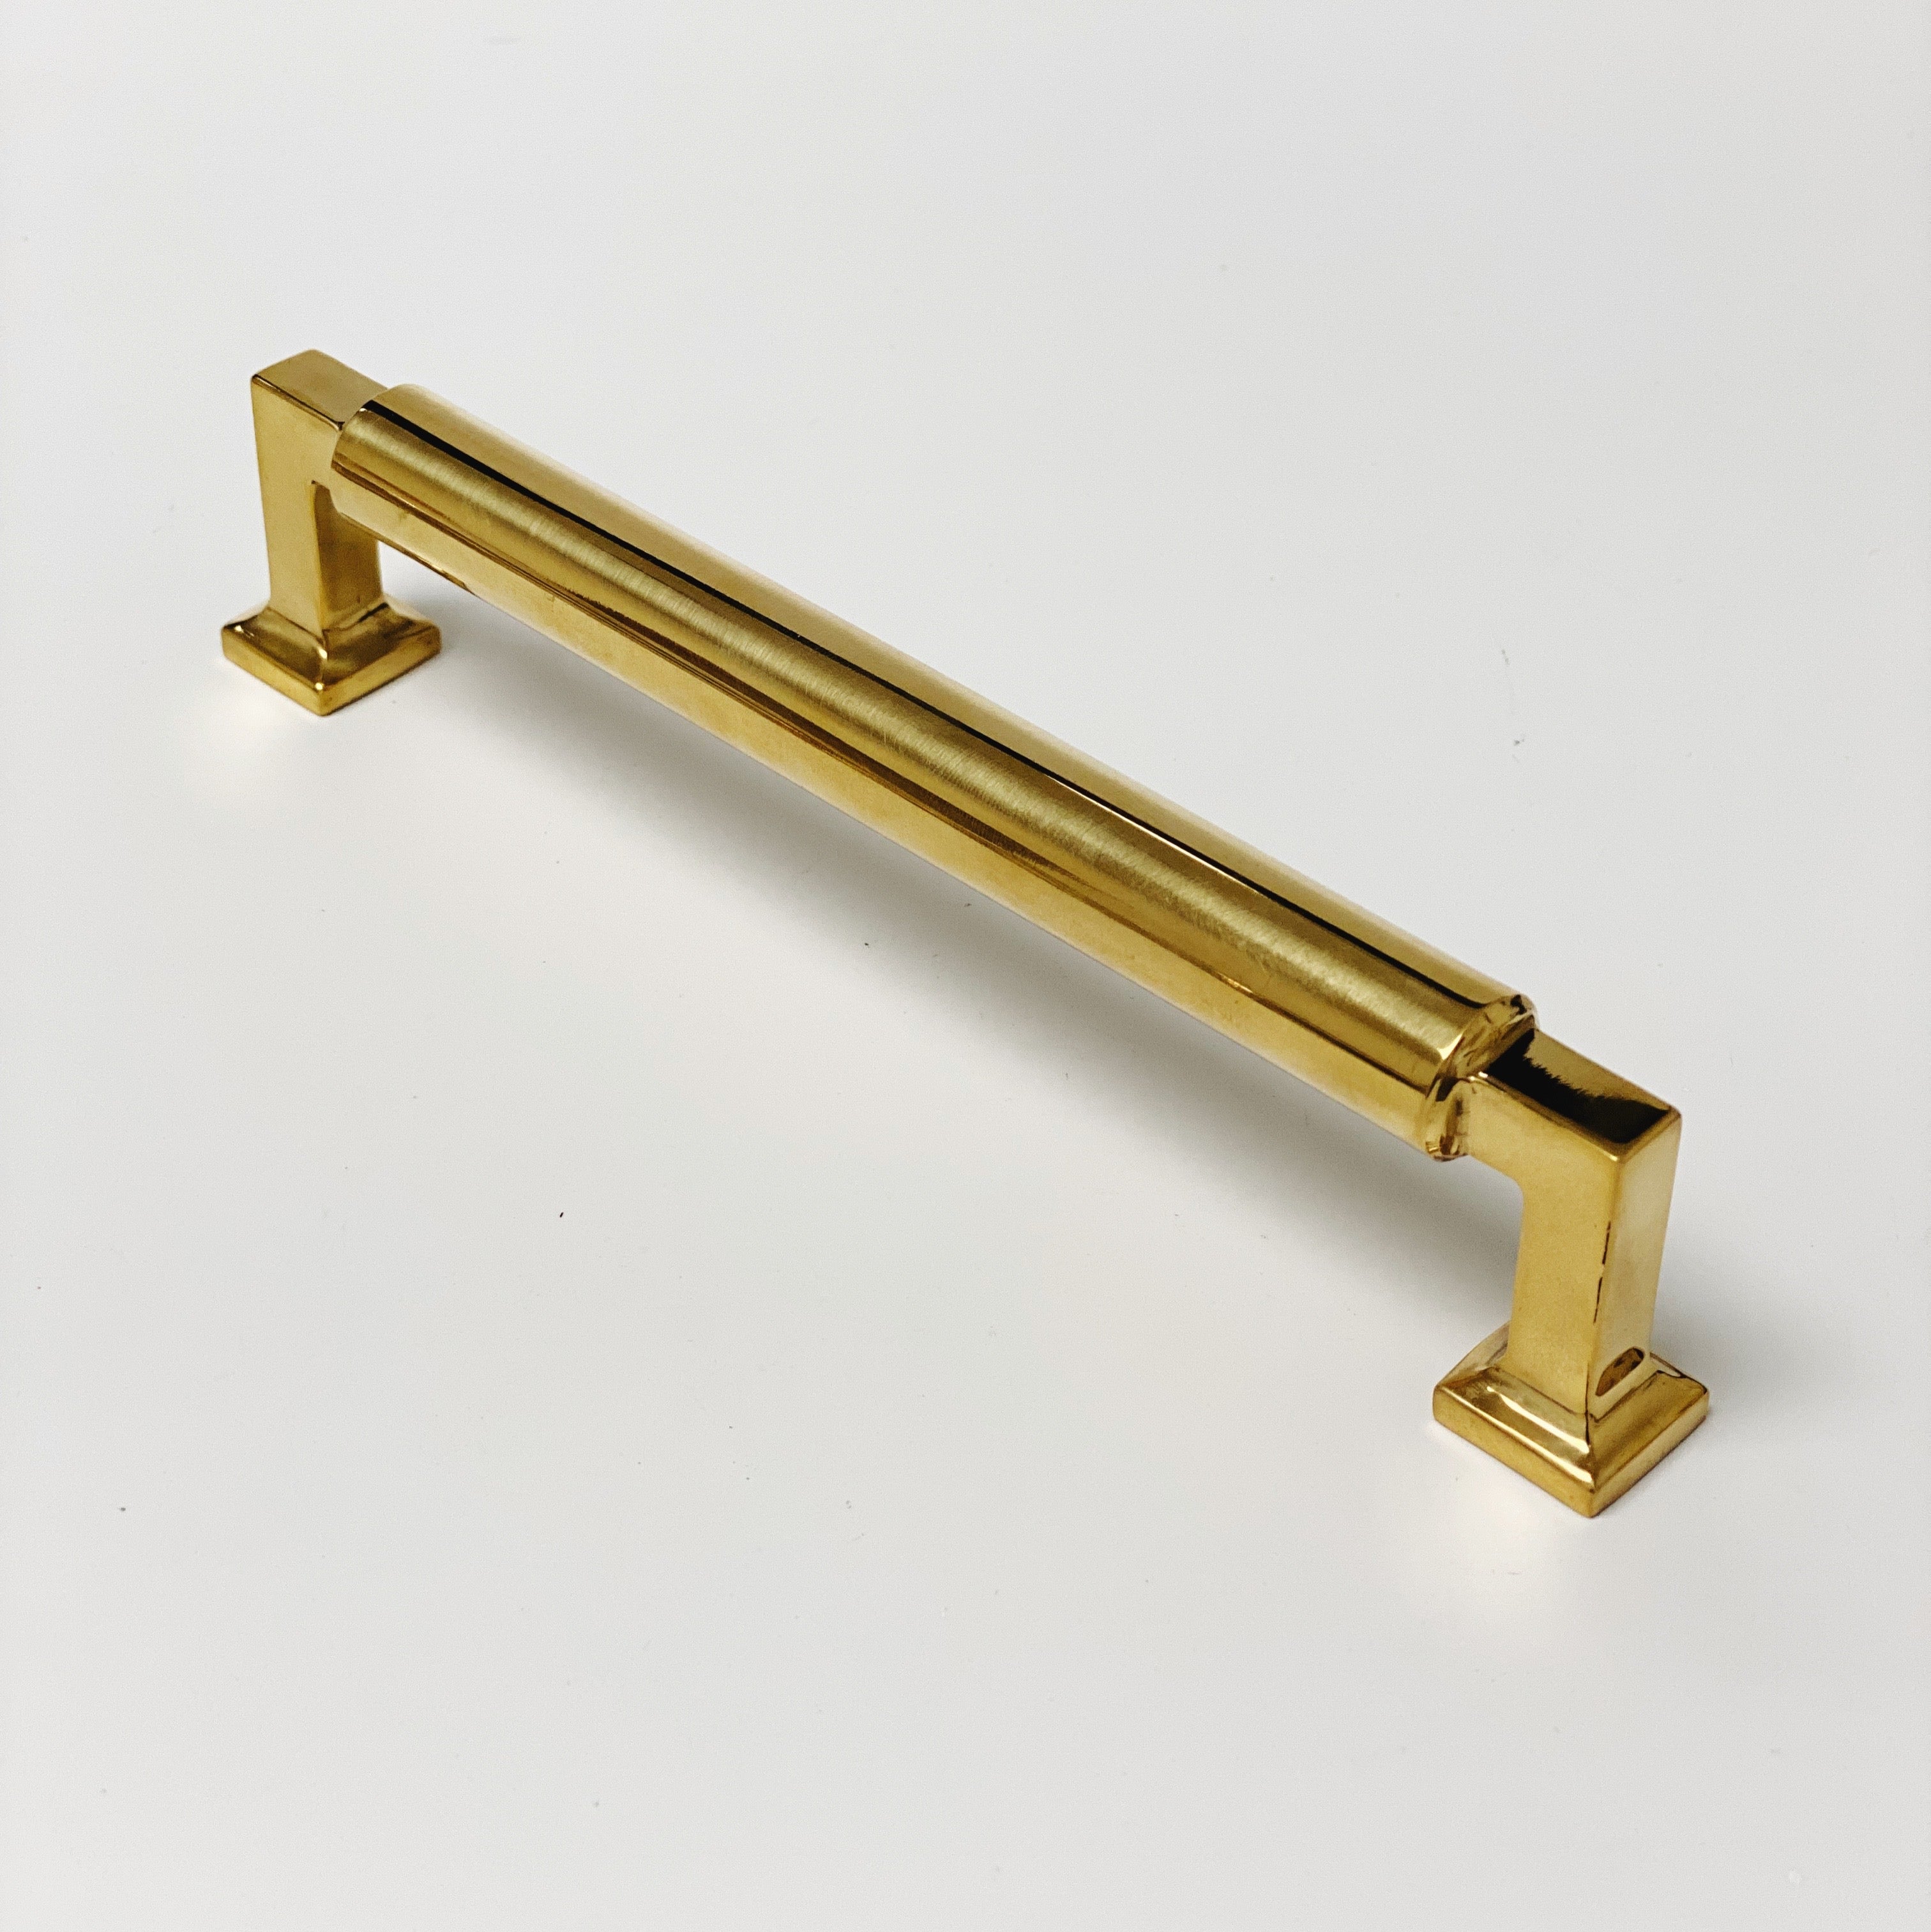 Satin Brass Luxe Drawer Pulls and Cabinet Knobs – Forge Hardware